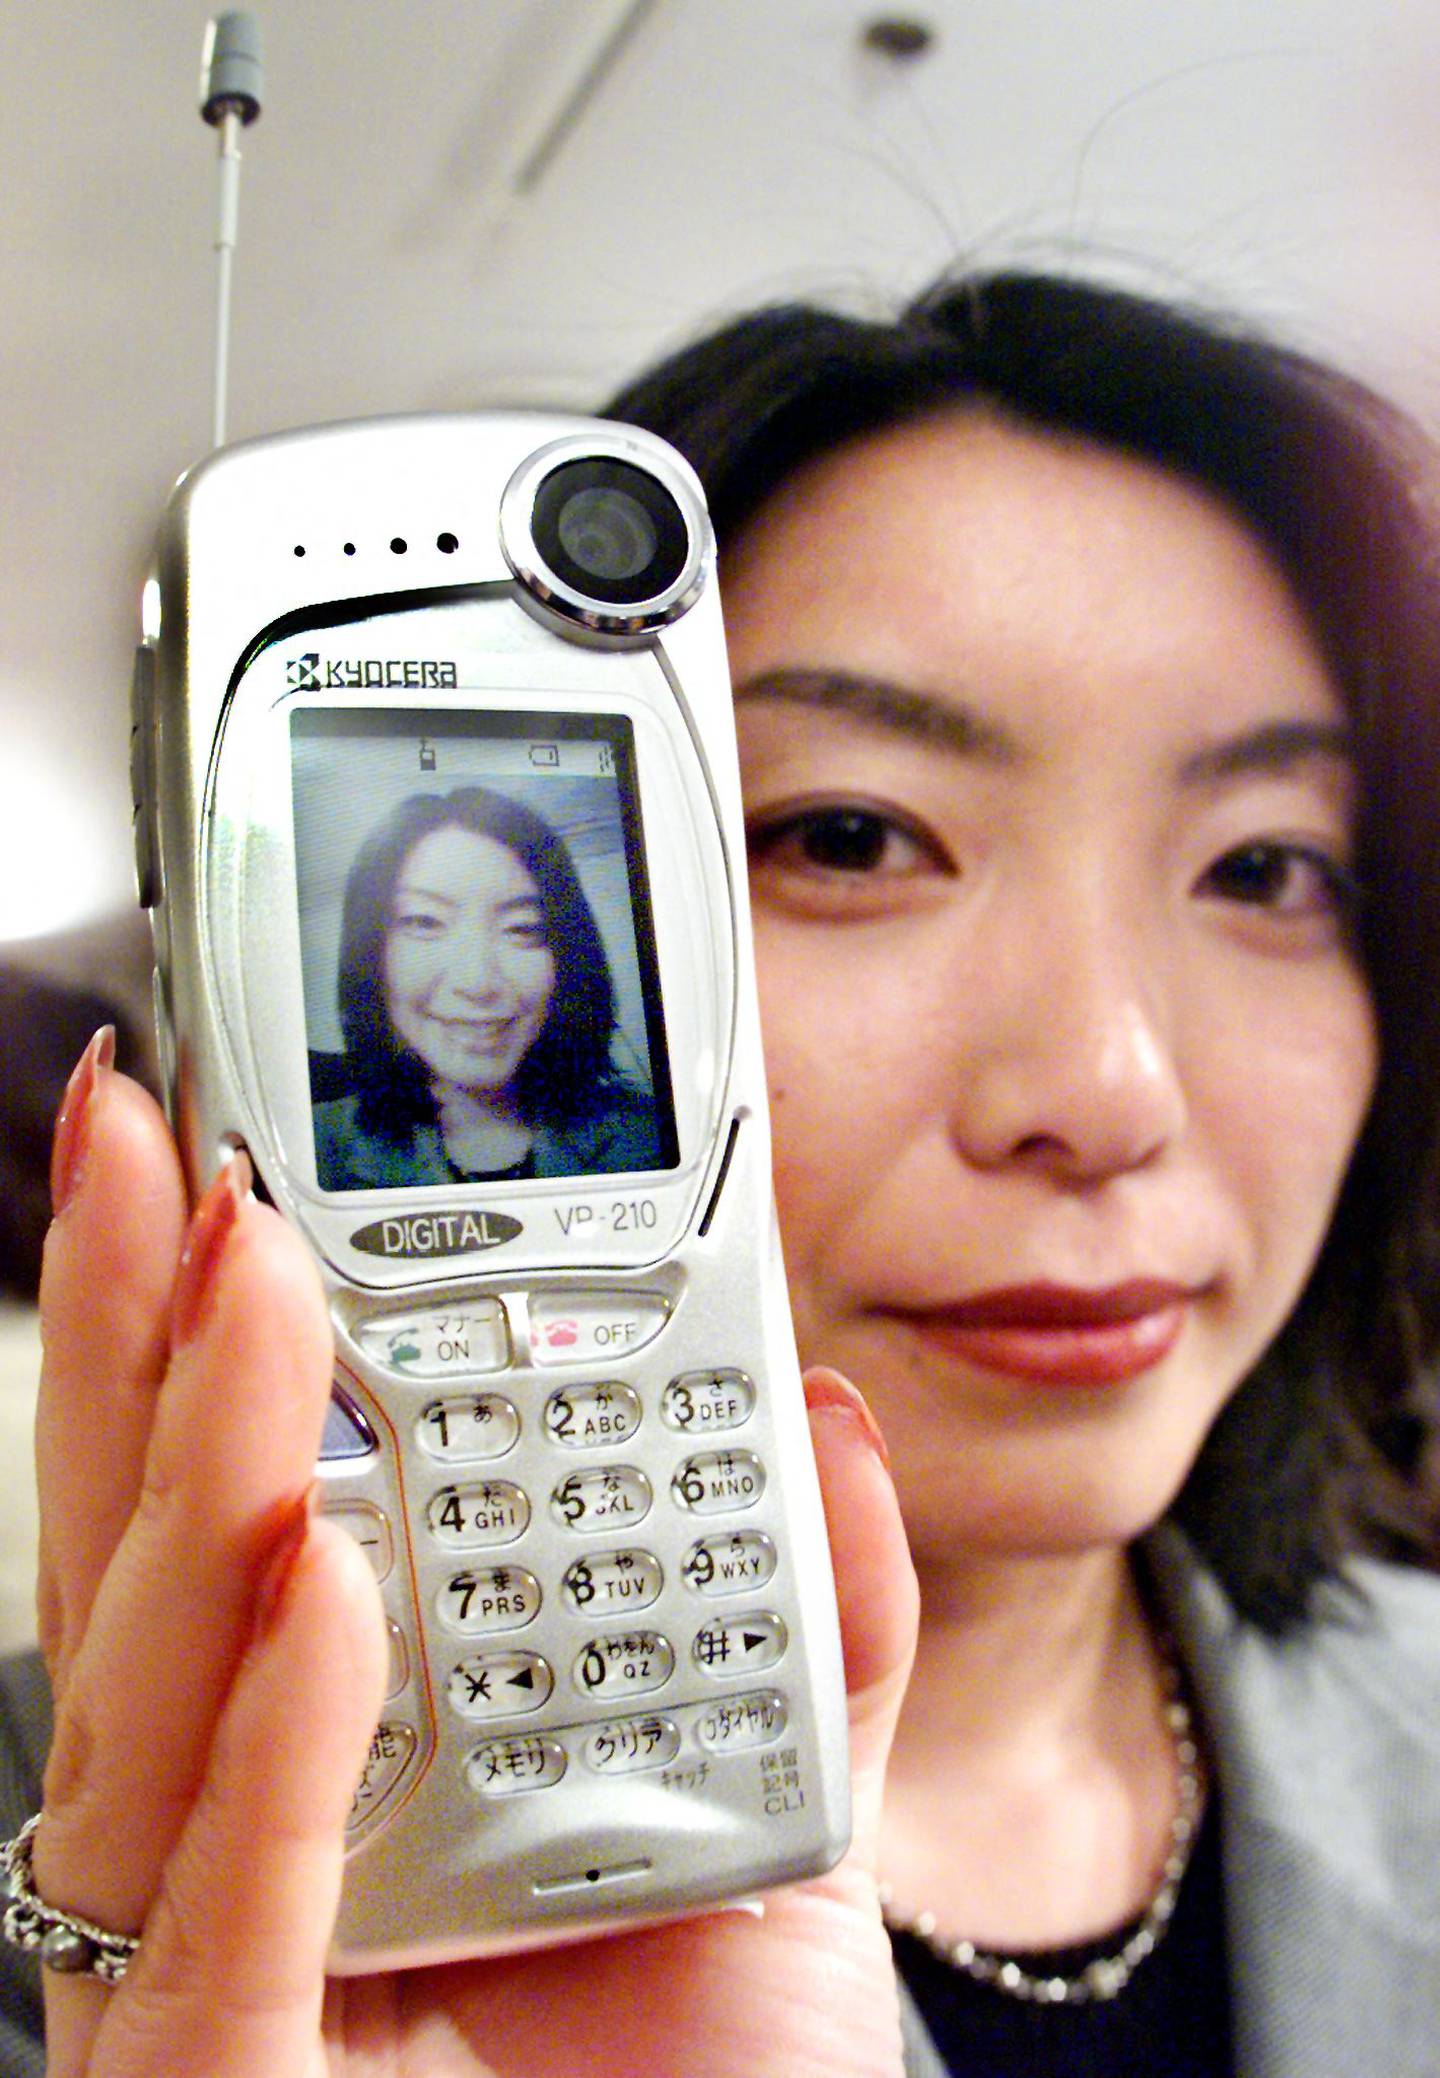 The Kyocera VP-210 had a front camera and can transmit two frames per second over a mobile phone line.  AFP